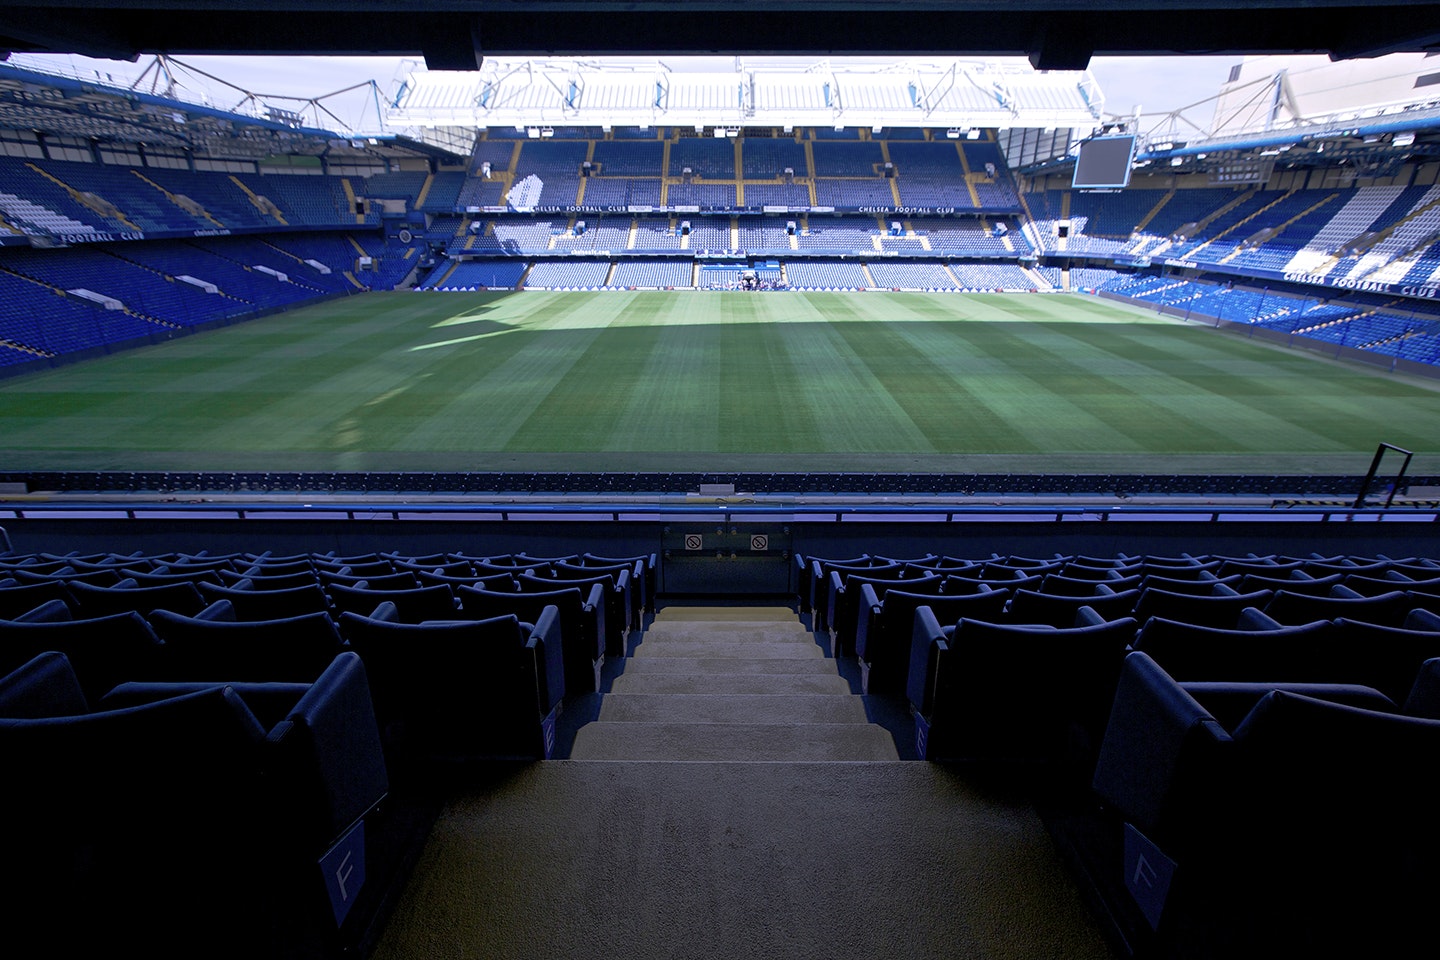 Chelsea Football Club - The Directors Lounge image 4